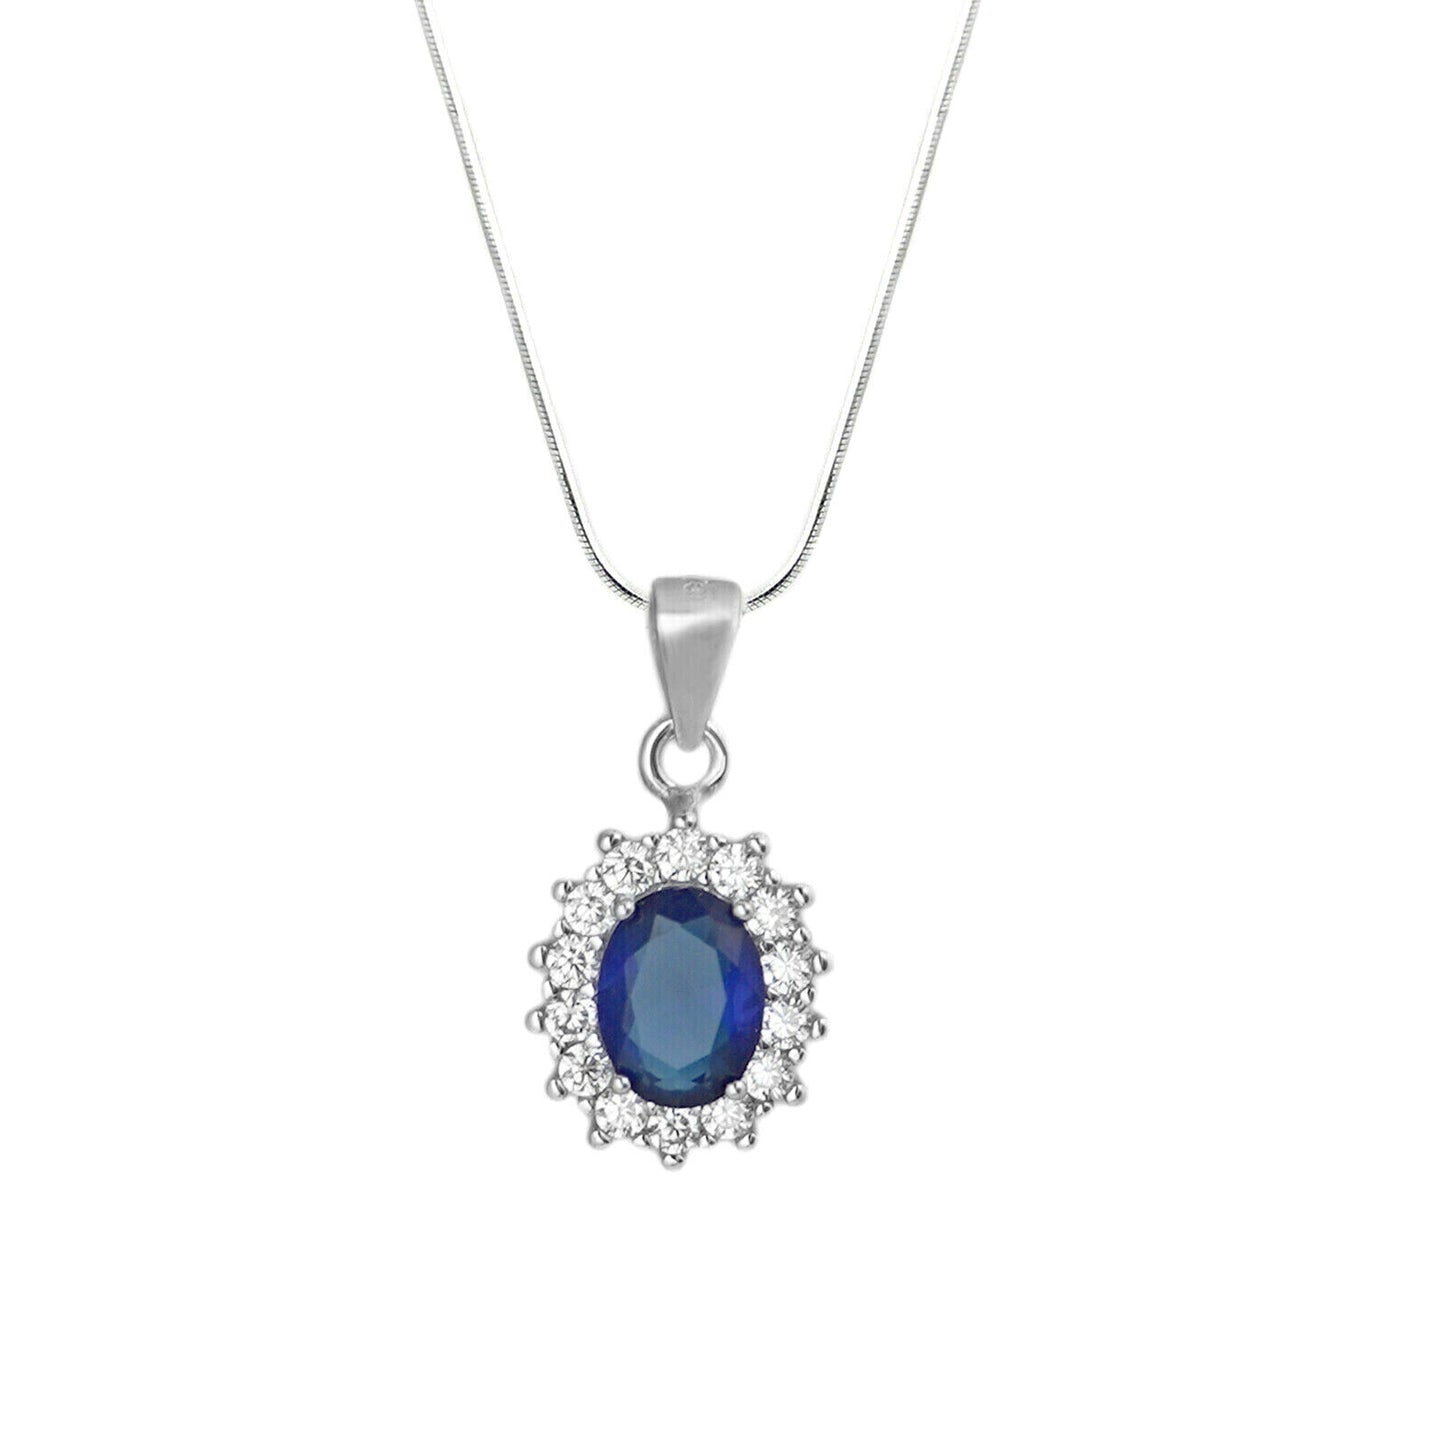 Stunning Blue CZ Sapphire Halo Cluster Pendant Necklace in Sterling Silver with 3 Chains